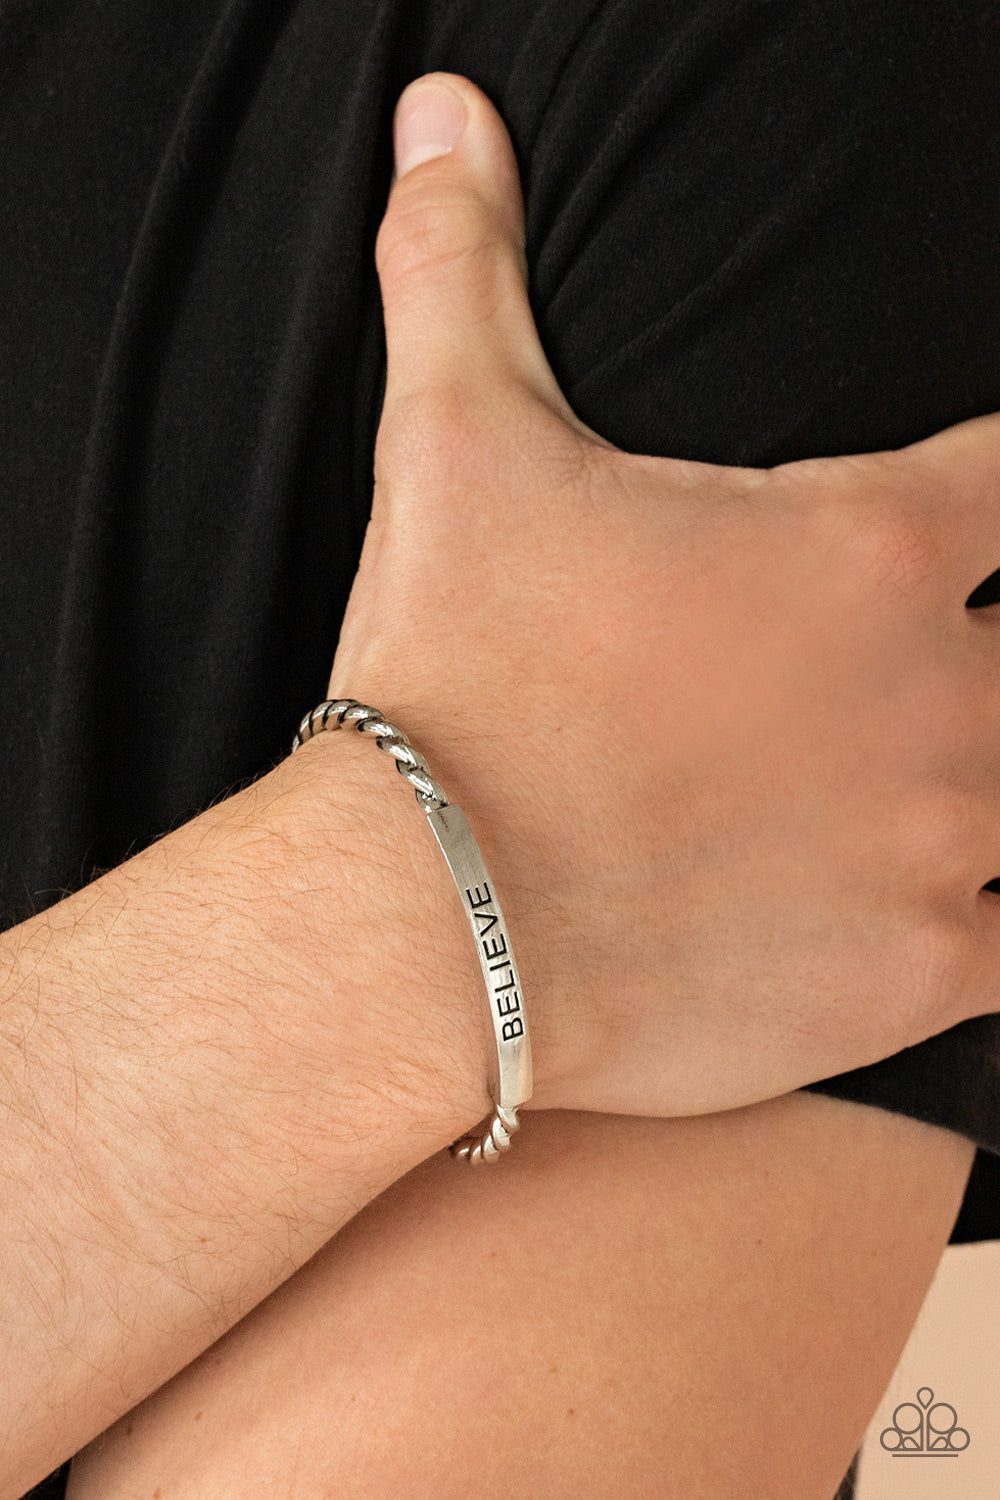 Keep Calm and Believe Bracelet - Silver